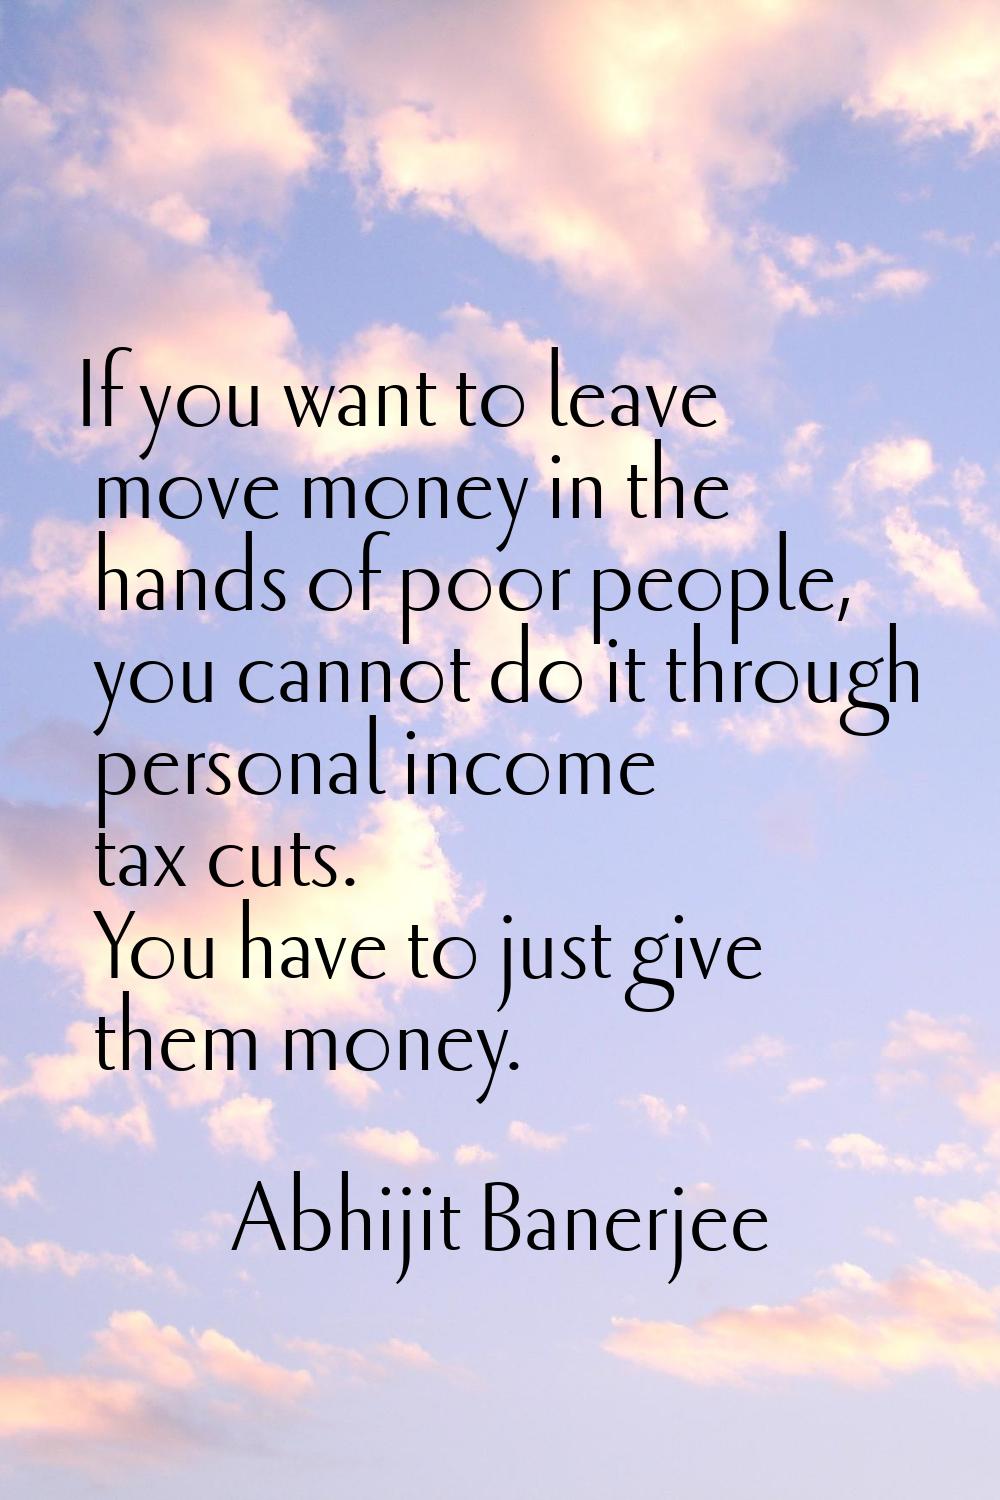 If you want to leave move money in the hands of poor people, you cannot do it through personal inco